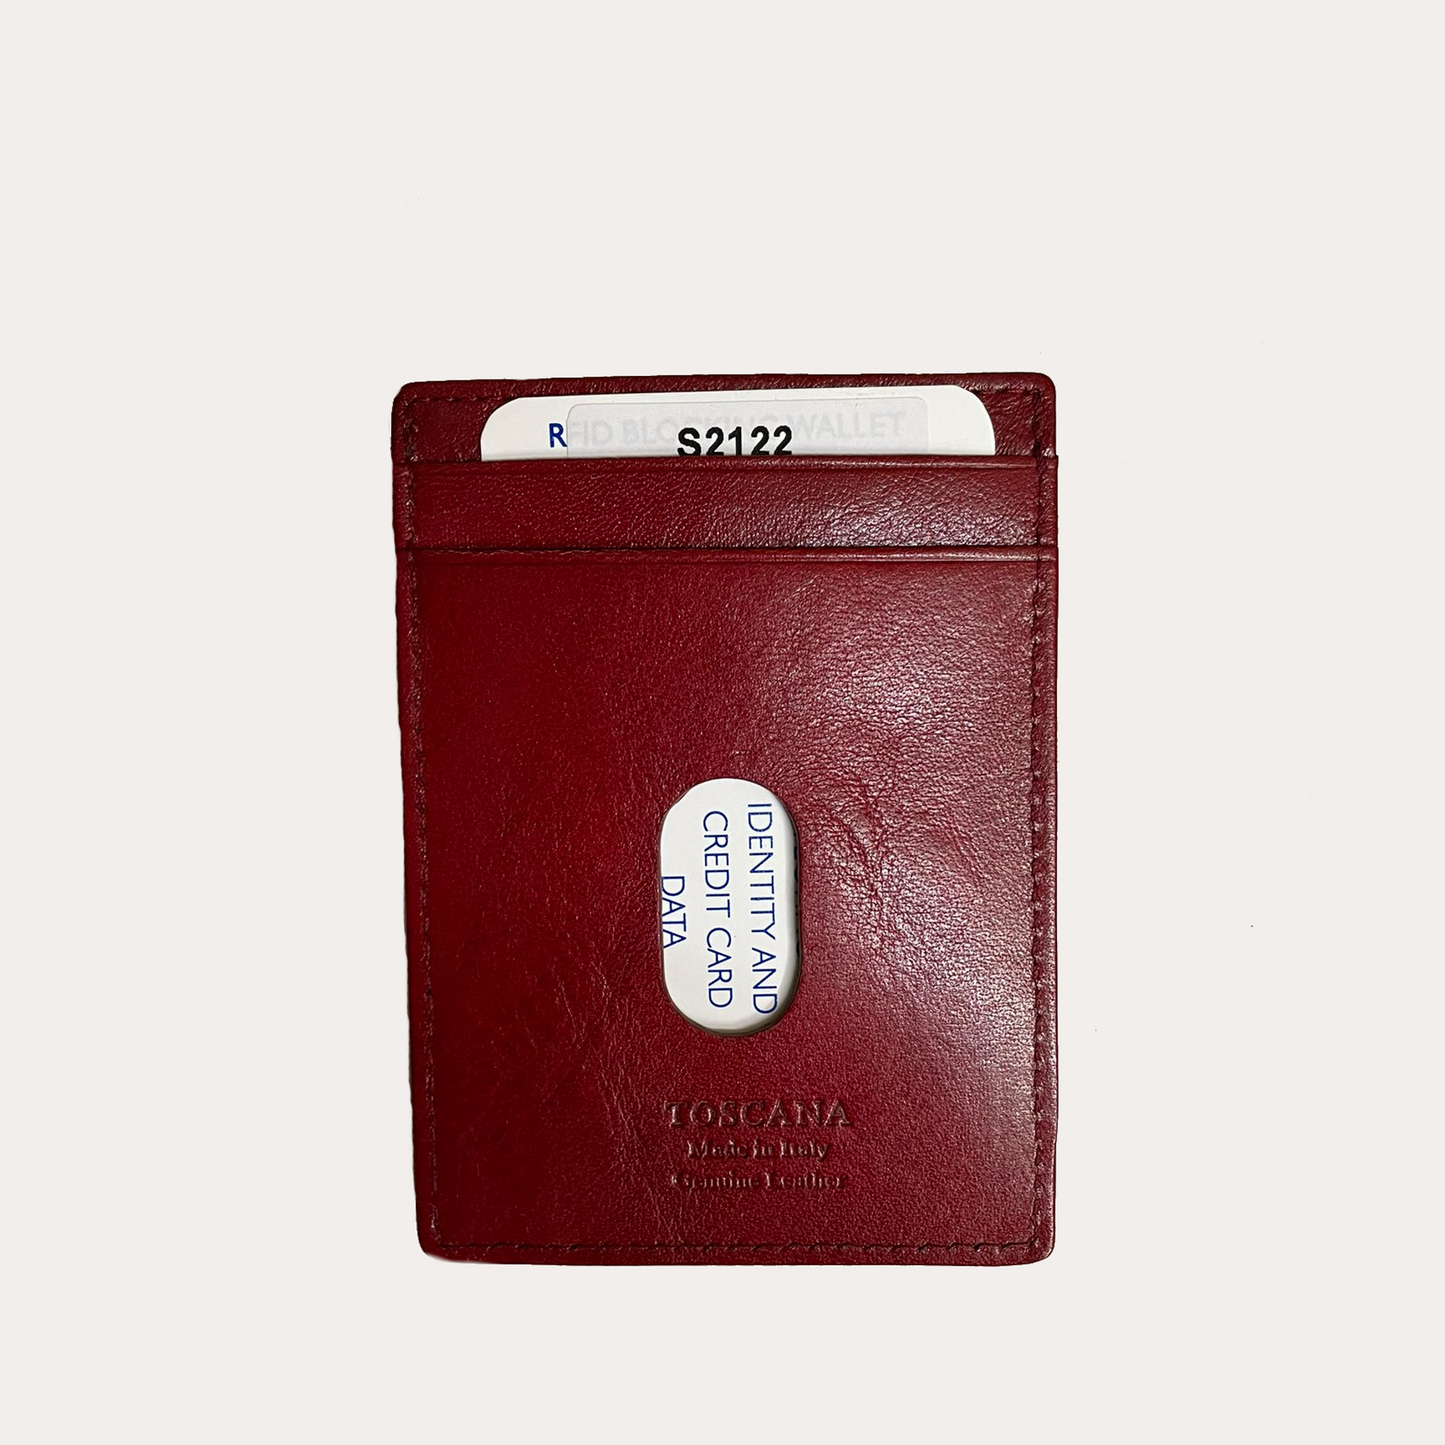 Red Leather Money Clip with Credit Card Holder